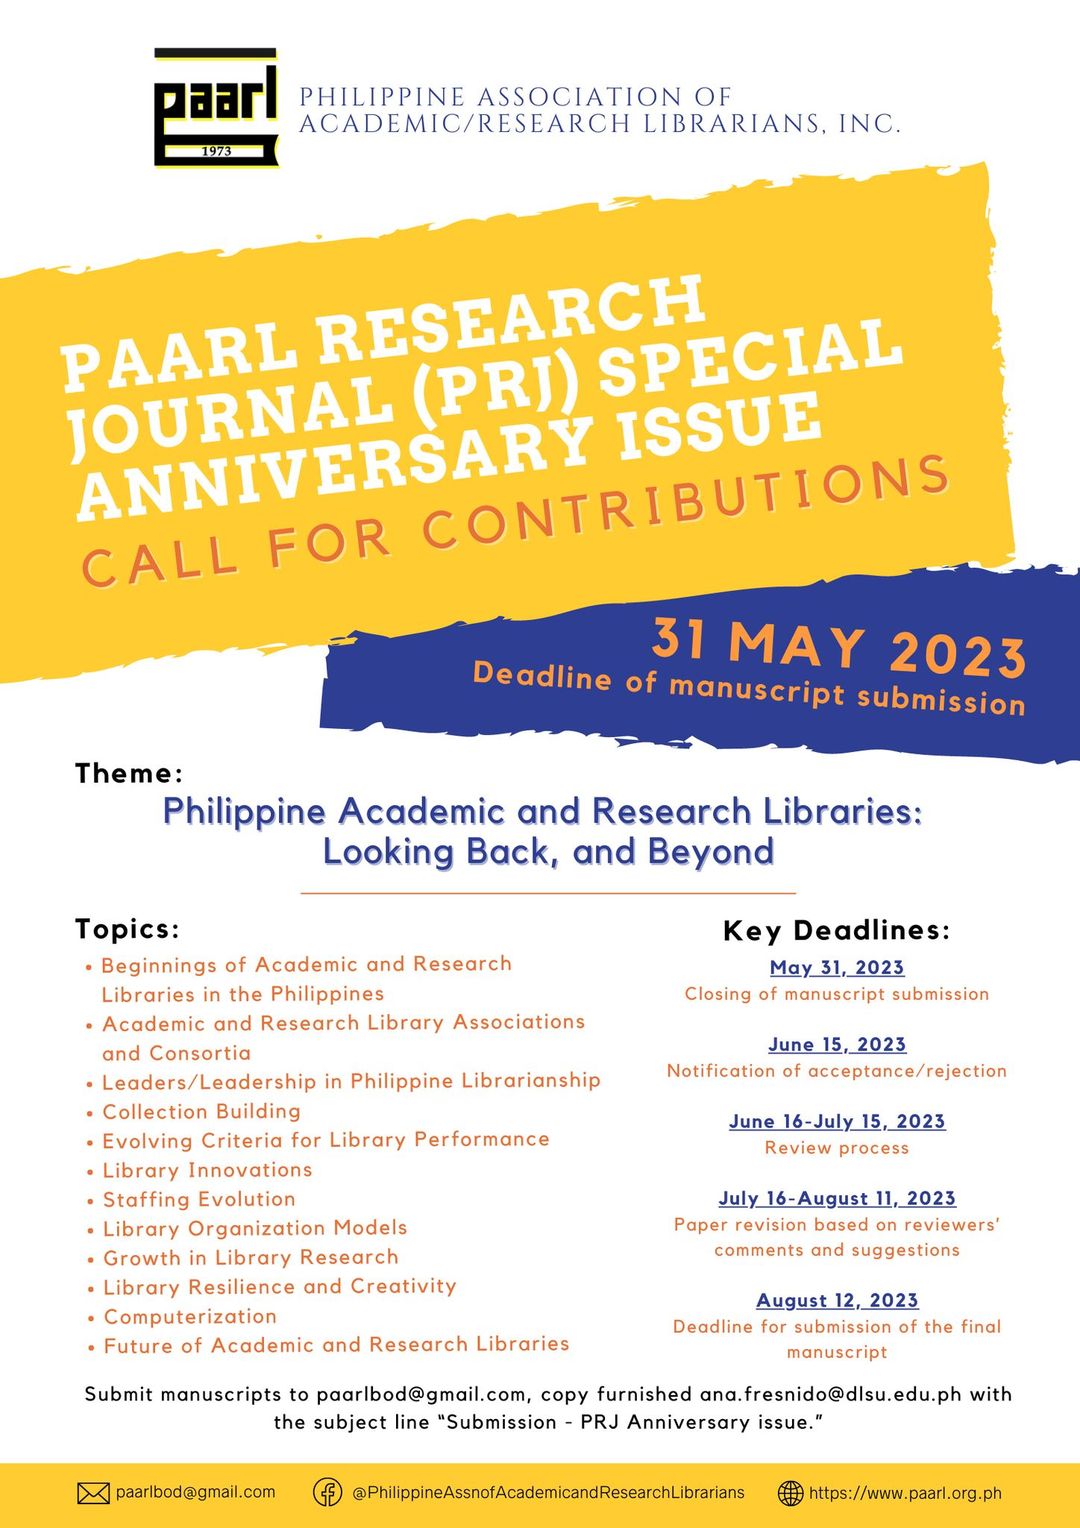 PAARL Research Journal Call for Papers Special Anniversary Issue